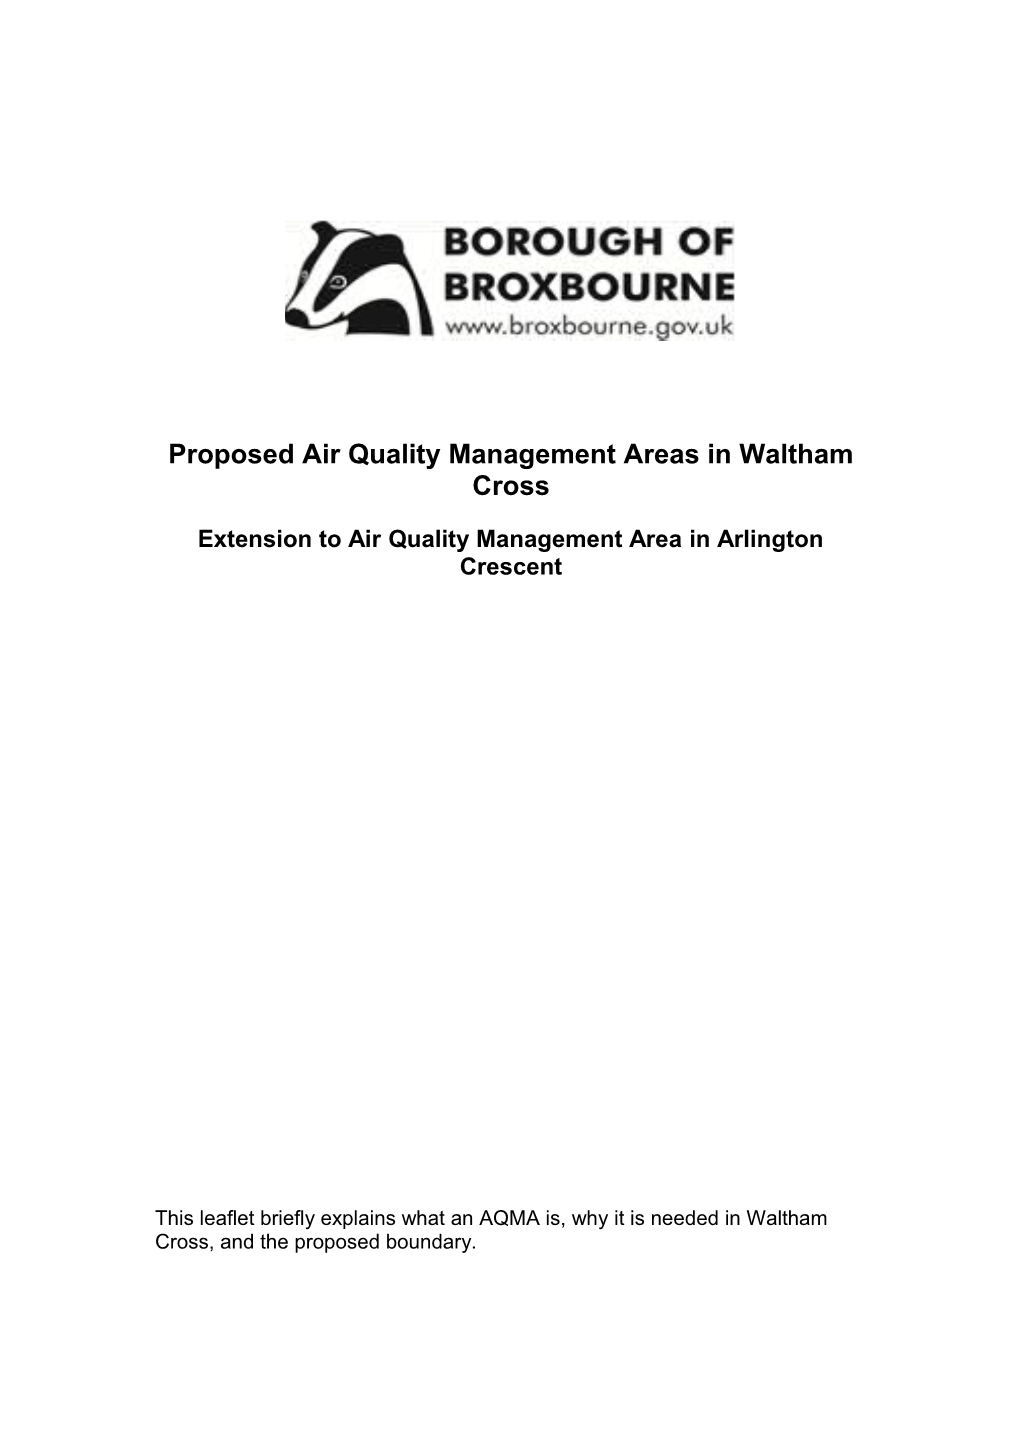 Proposed Air Quality Management Areas in Waltham Cross